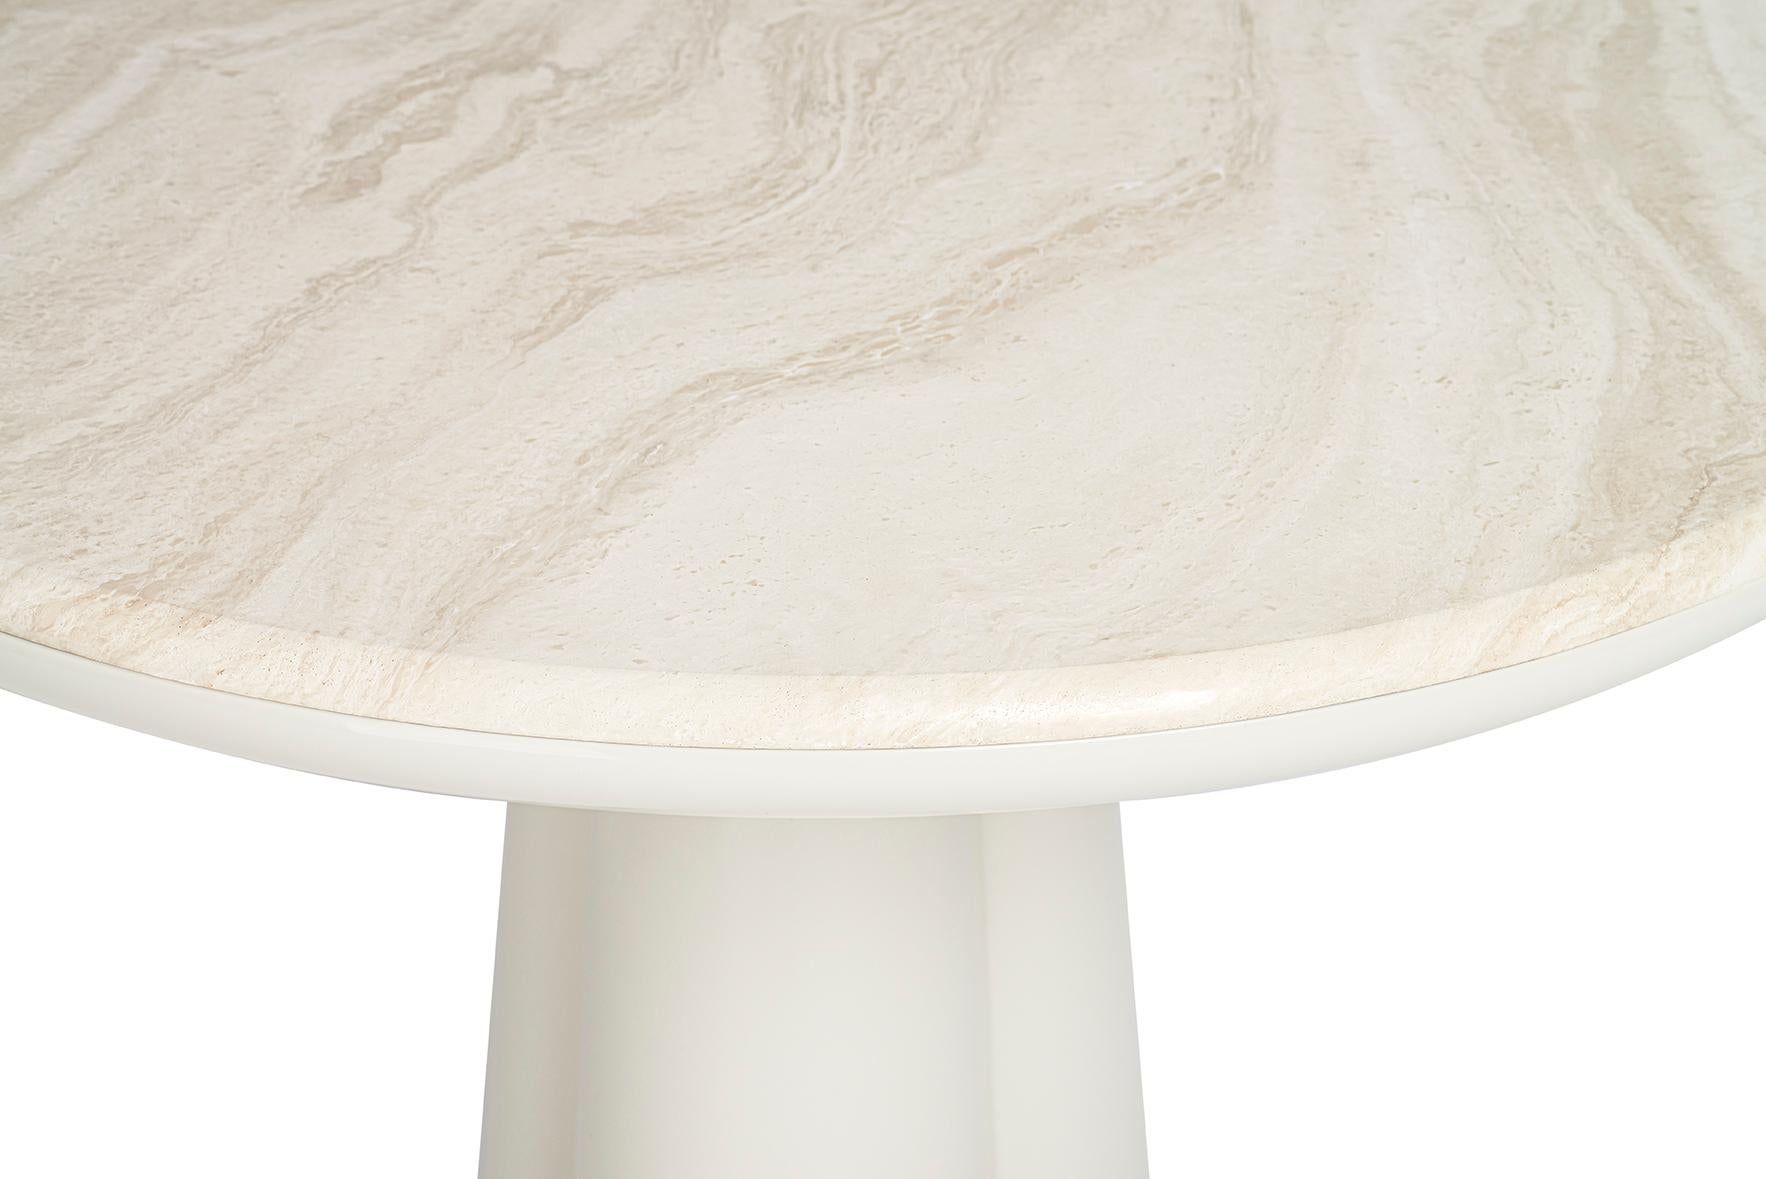 21st Cent. Elena Salmistraro Table Polyurethane Red Levanto Marble Top Mat Base For Sale 2